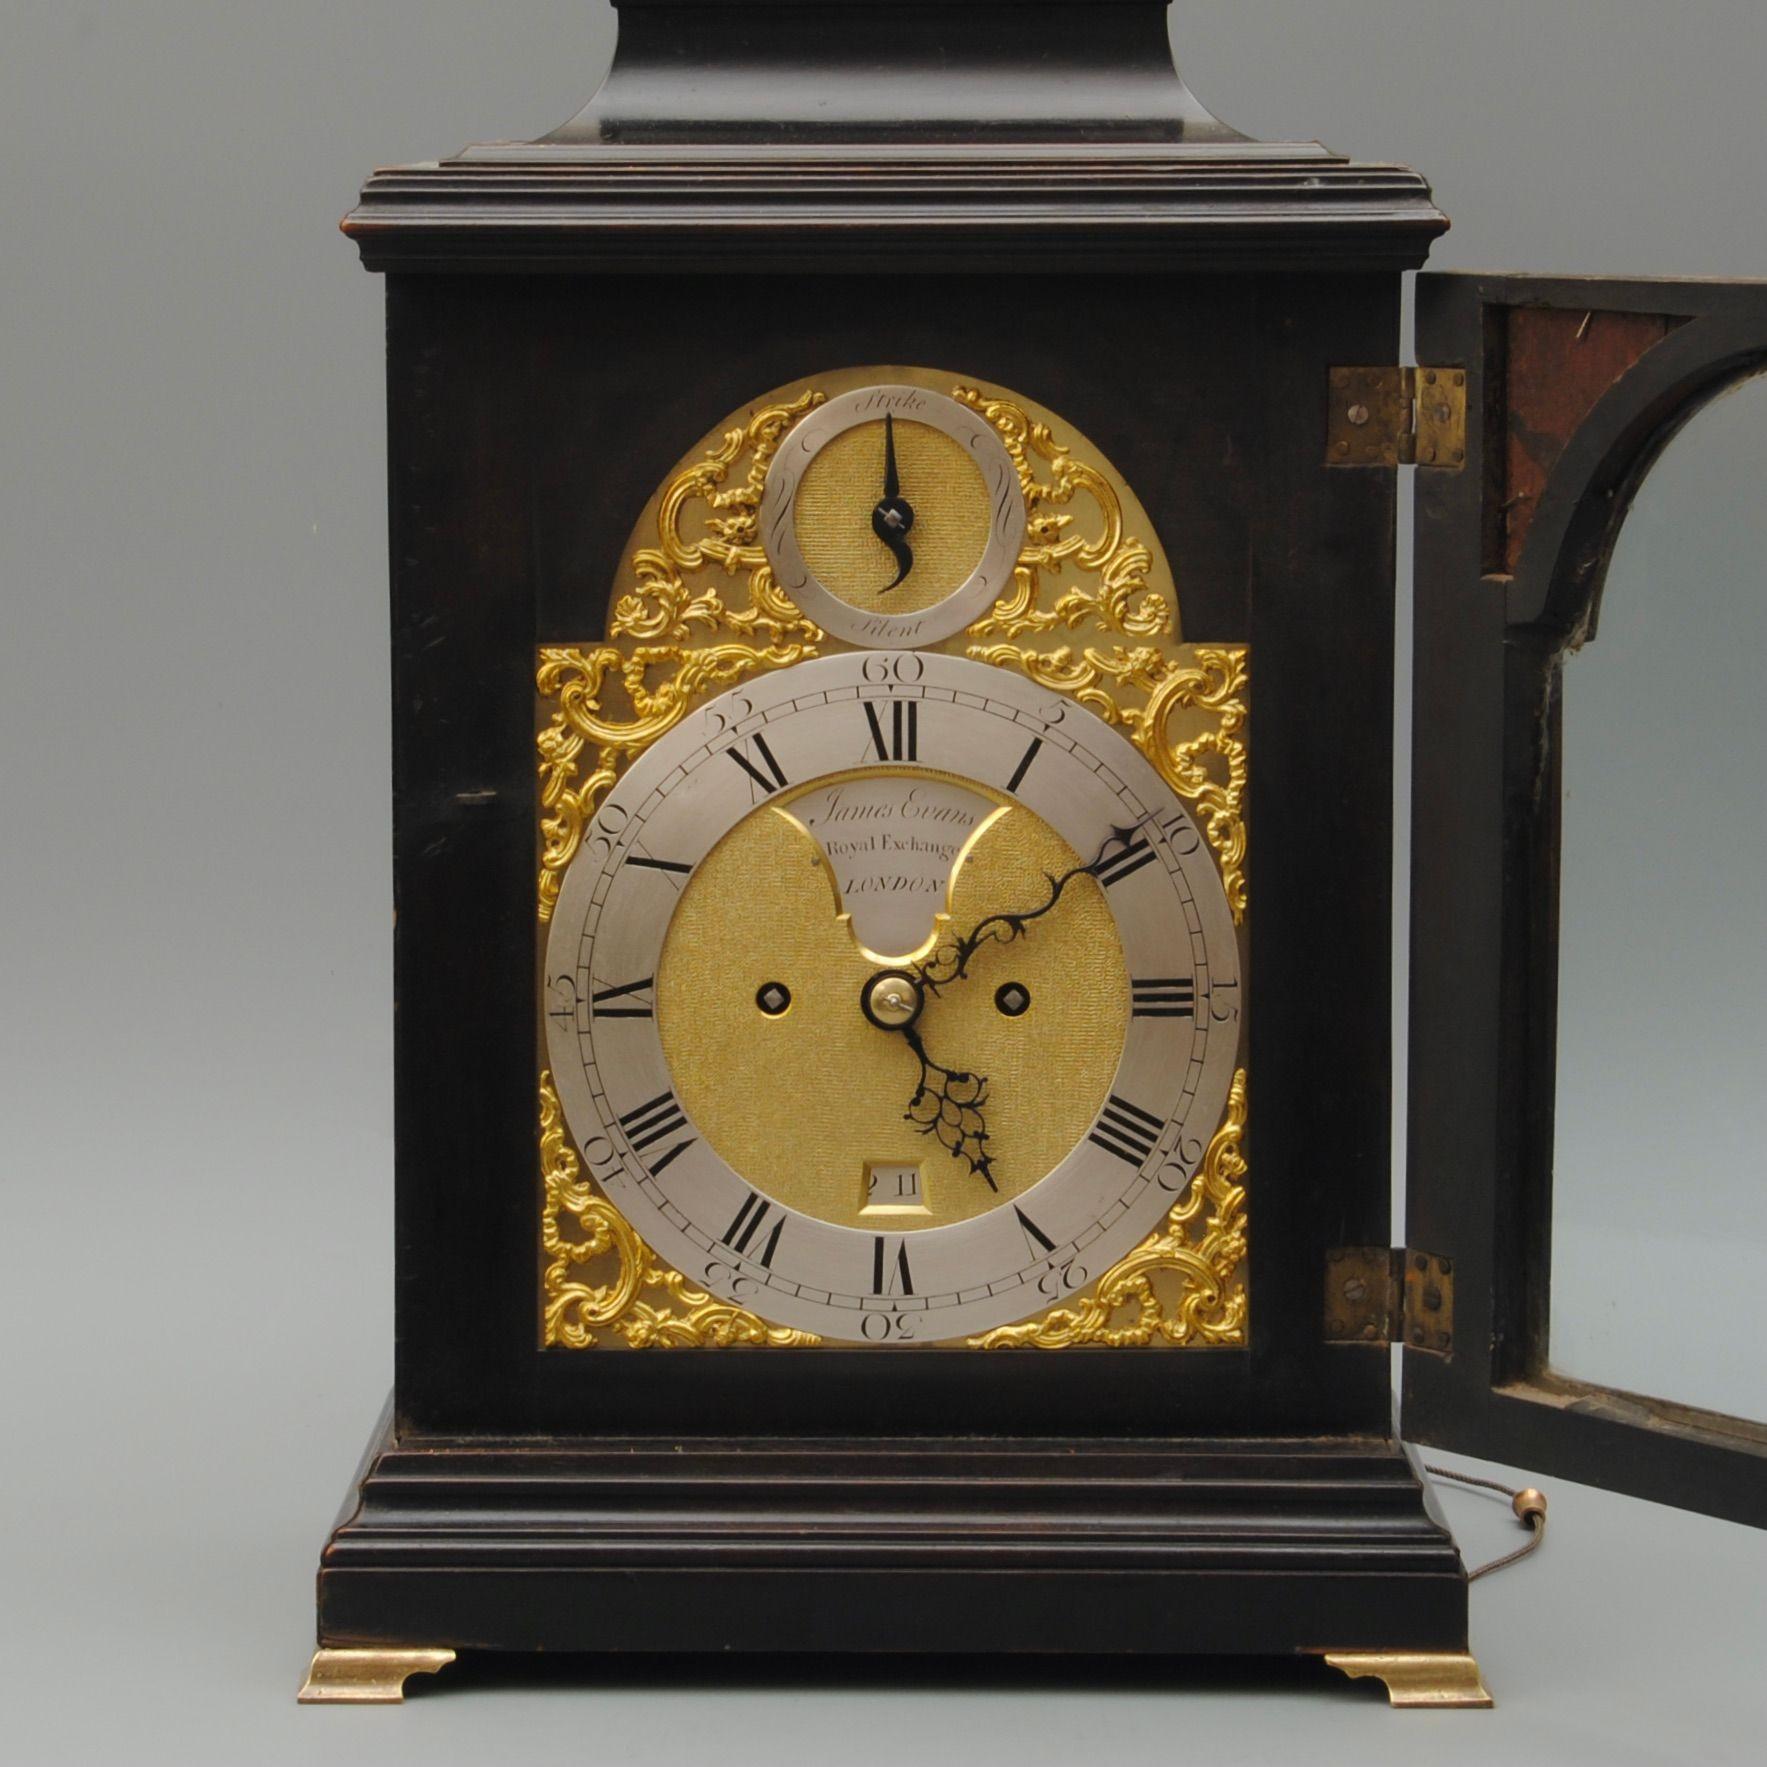 An elegant 18th century 8 day verge bracket clock in ebonised case by James Evans London. 
The back plate beautifully engraved.
The movement has been fully cleaned and comes with a 12 month warrantee.
Circa 1770.